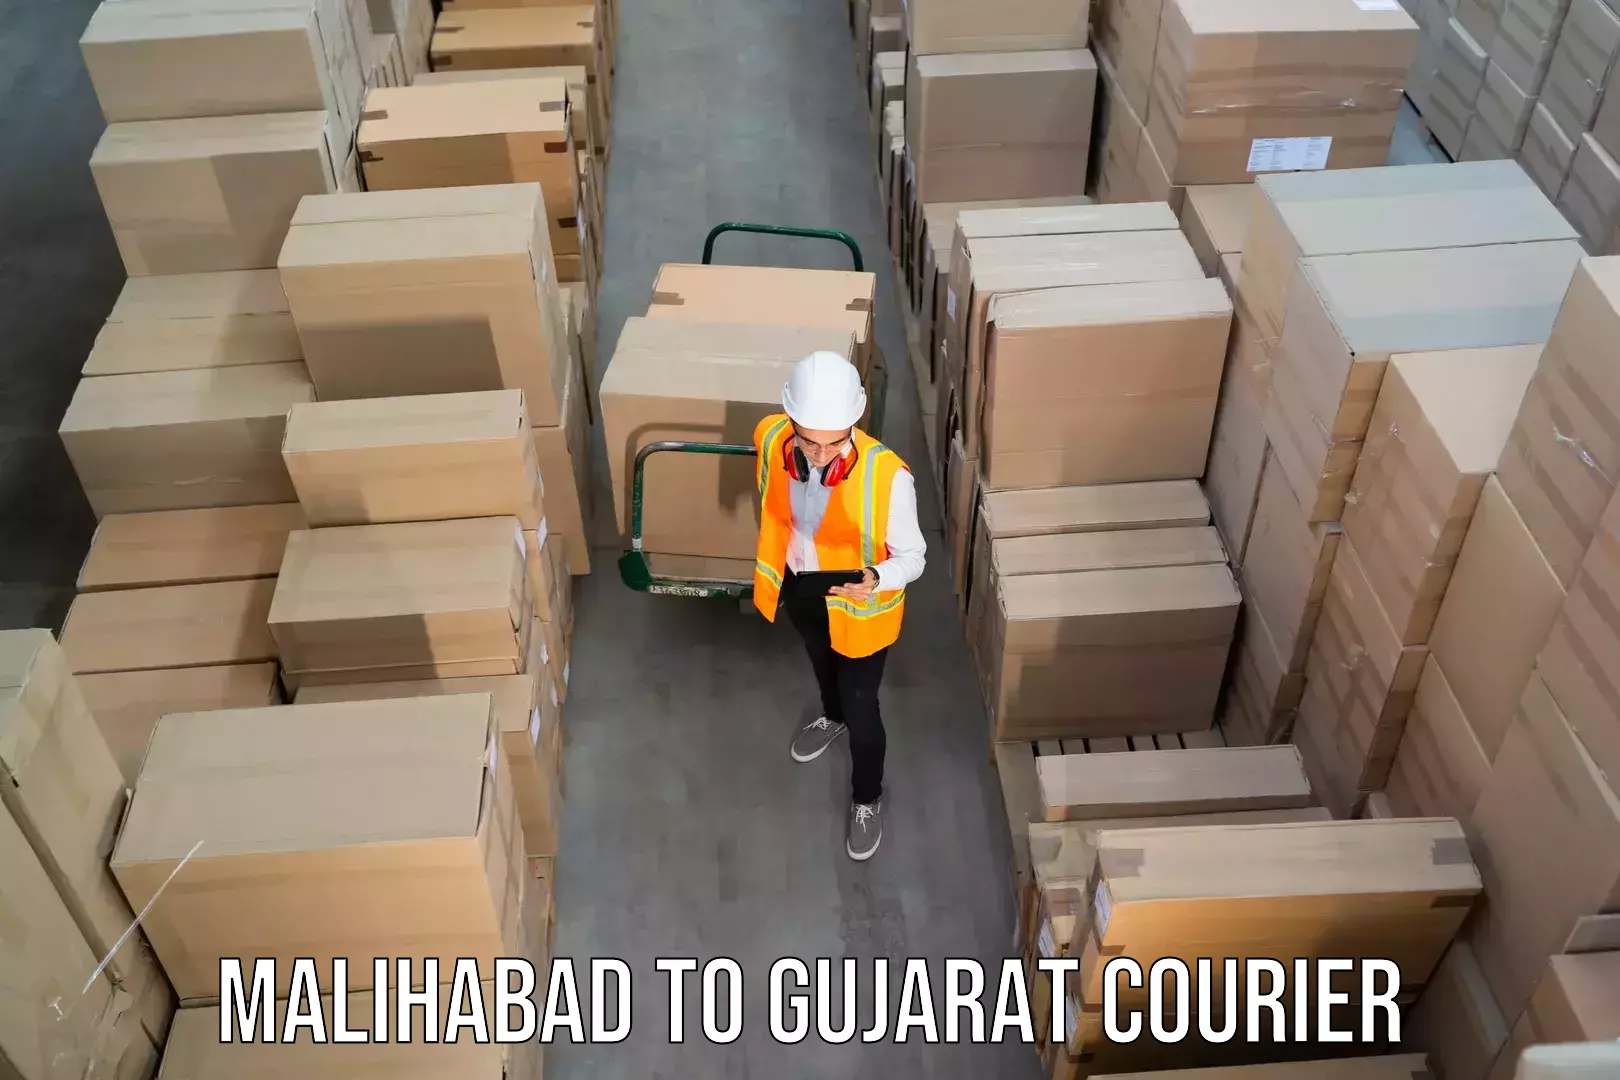 Courier service partnerships Malihabad to Sanand